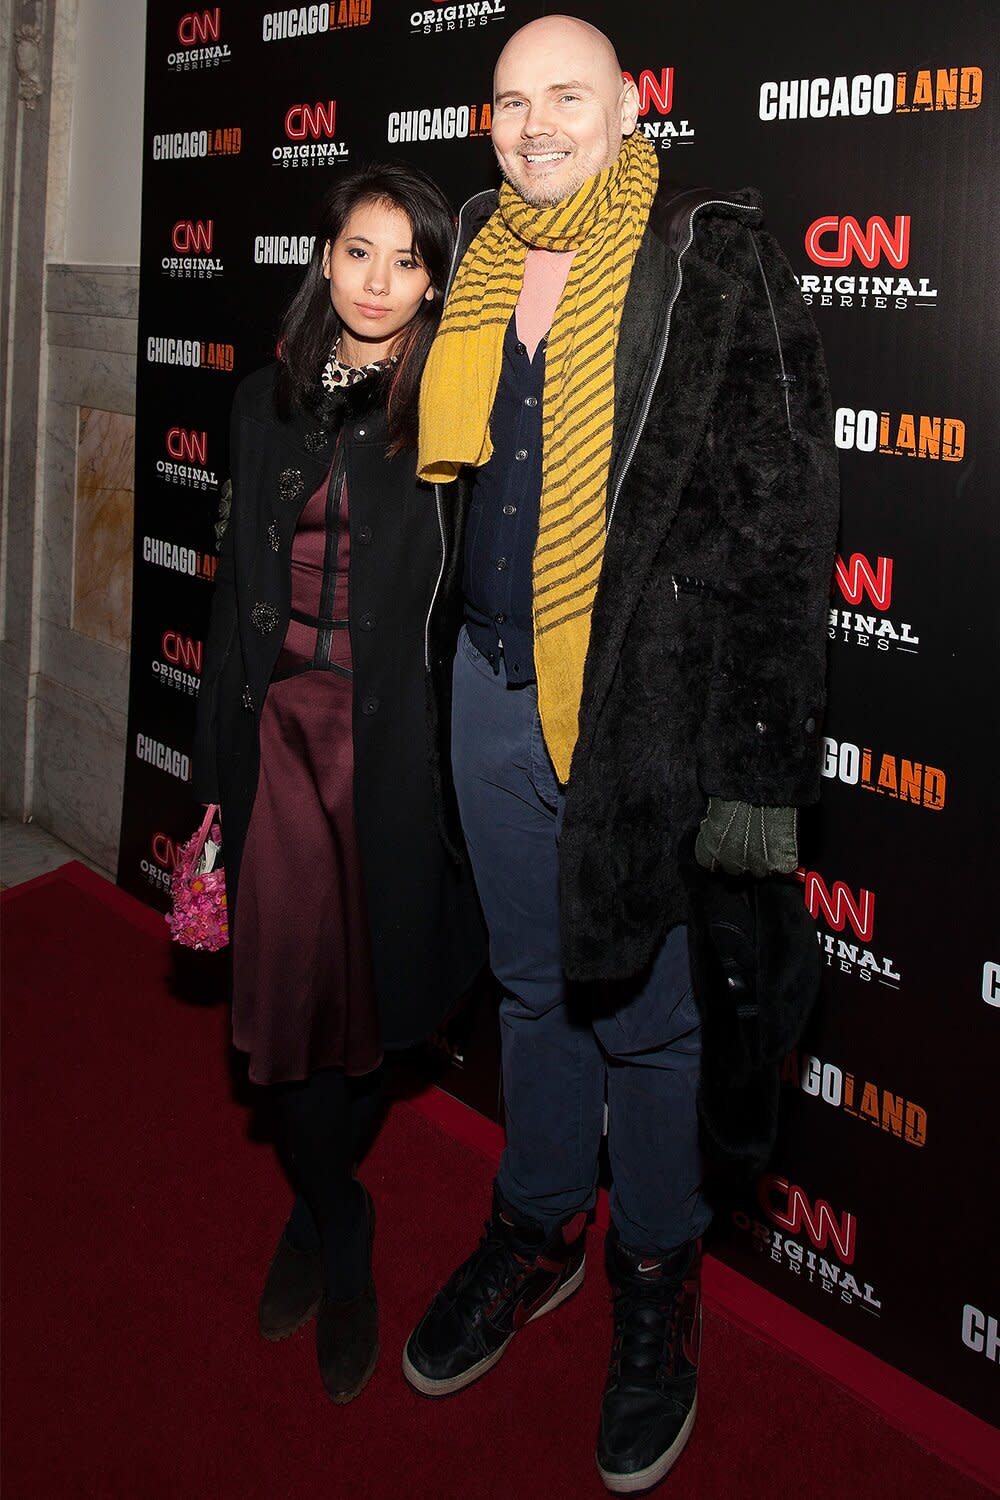 Chloe Mendel and Billy Corgan attend the "Chicagoland" series premiere at Bank of America Theater on March 4, 2014 in Chicago, Illinois.